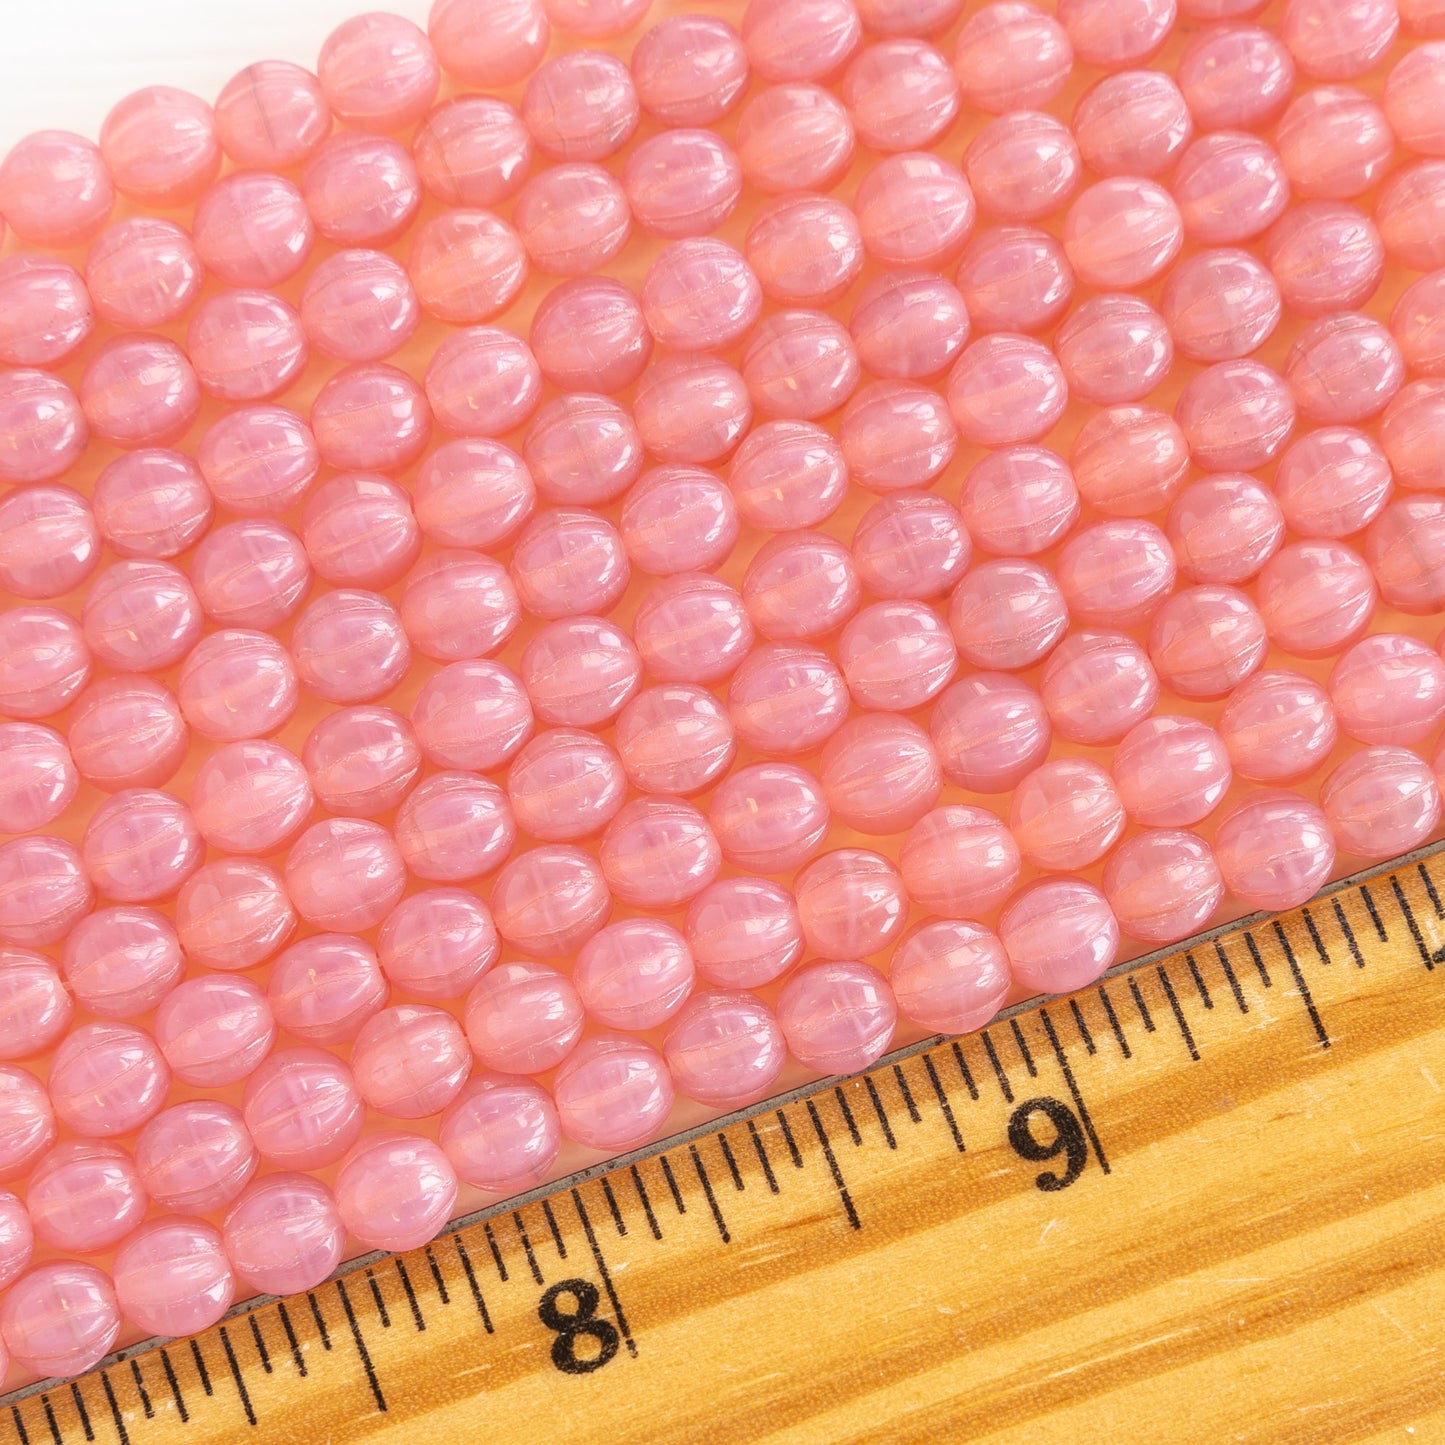 Load image into Gallery viewer, 6mm Glass Melon Beads - Opaline Pink Rose - 40 Beads
